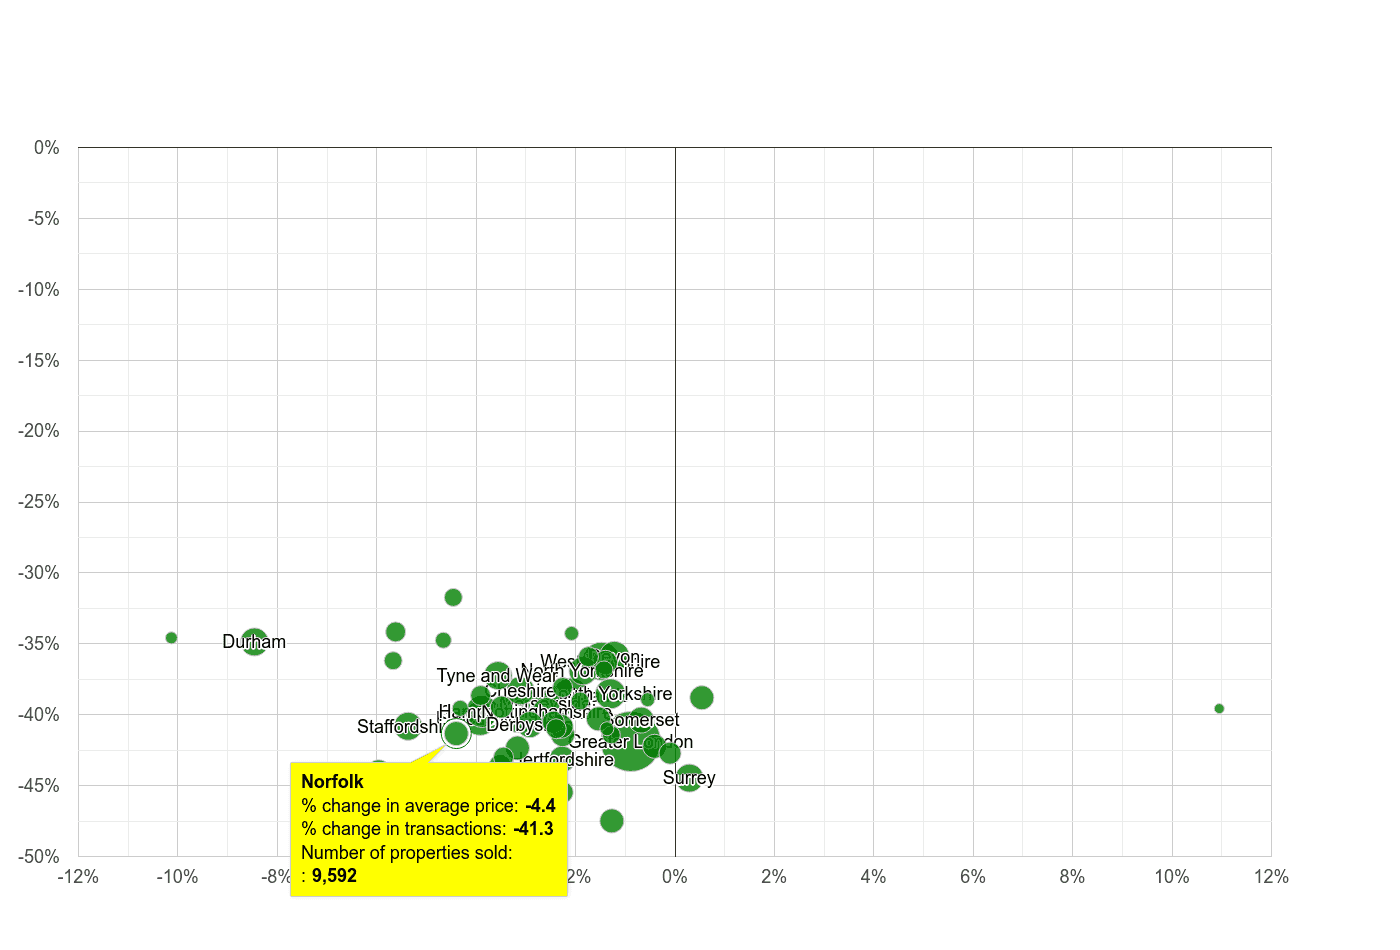 Norfolk property price and sales volume change relative to other counties